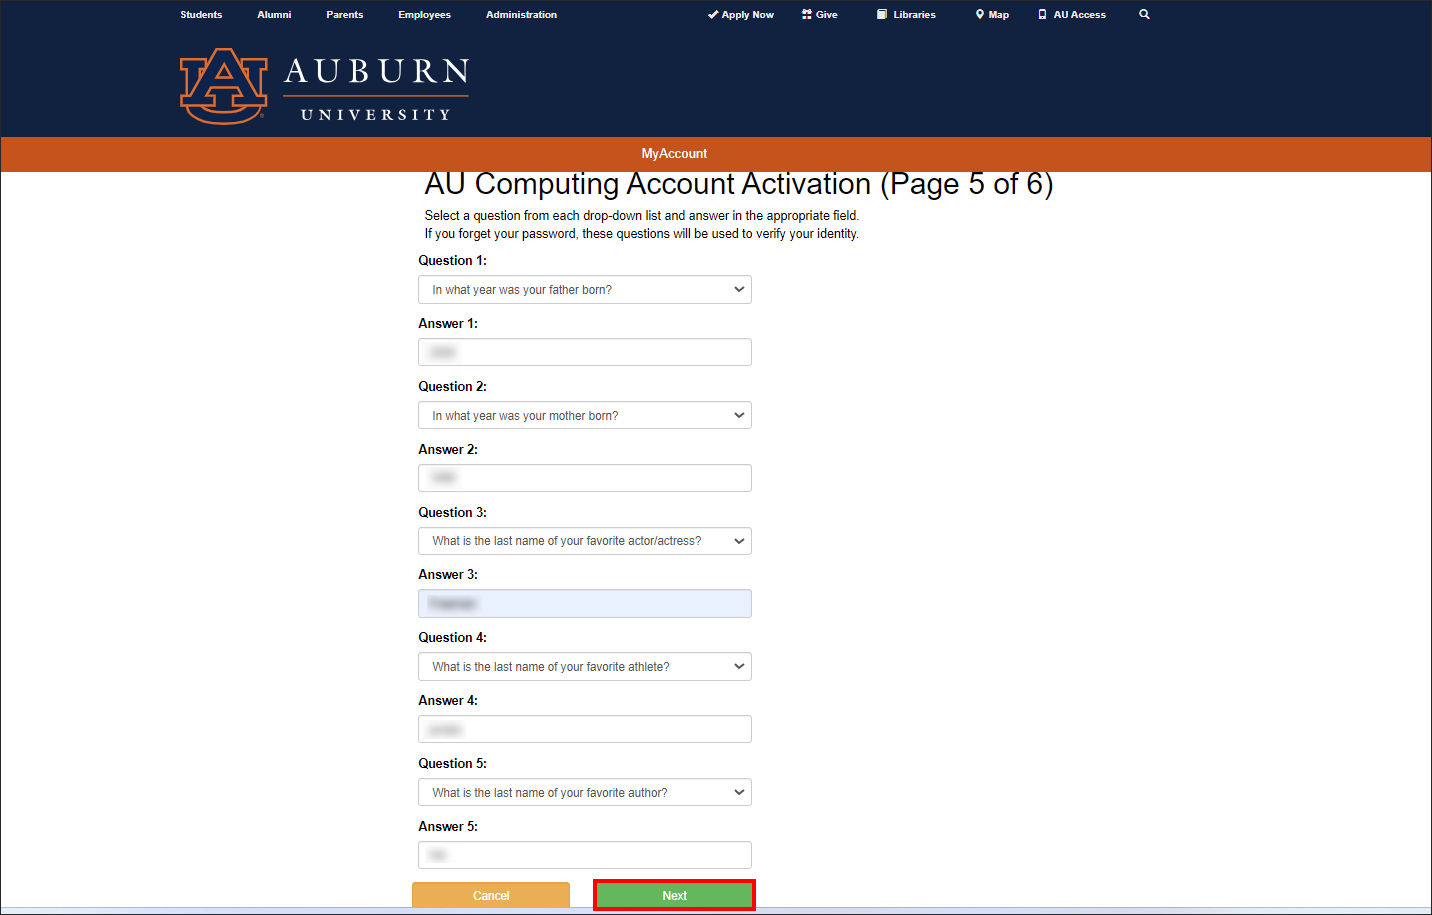 AU account activation questions and answers screen